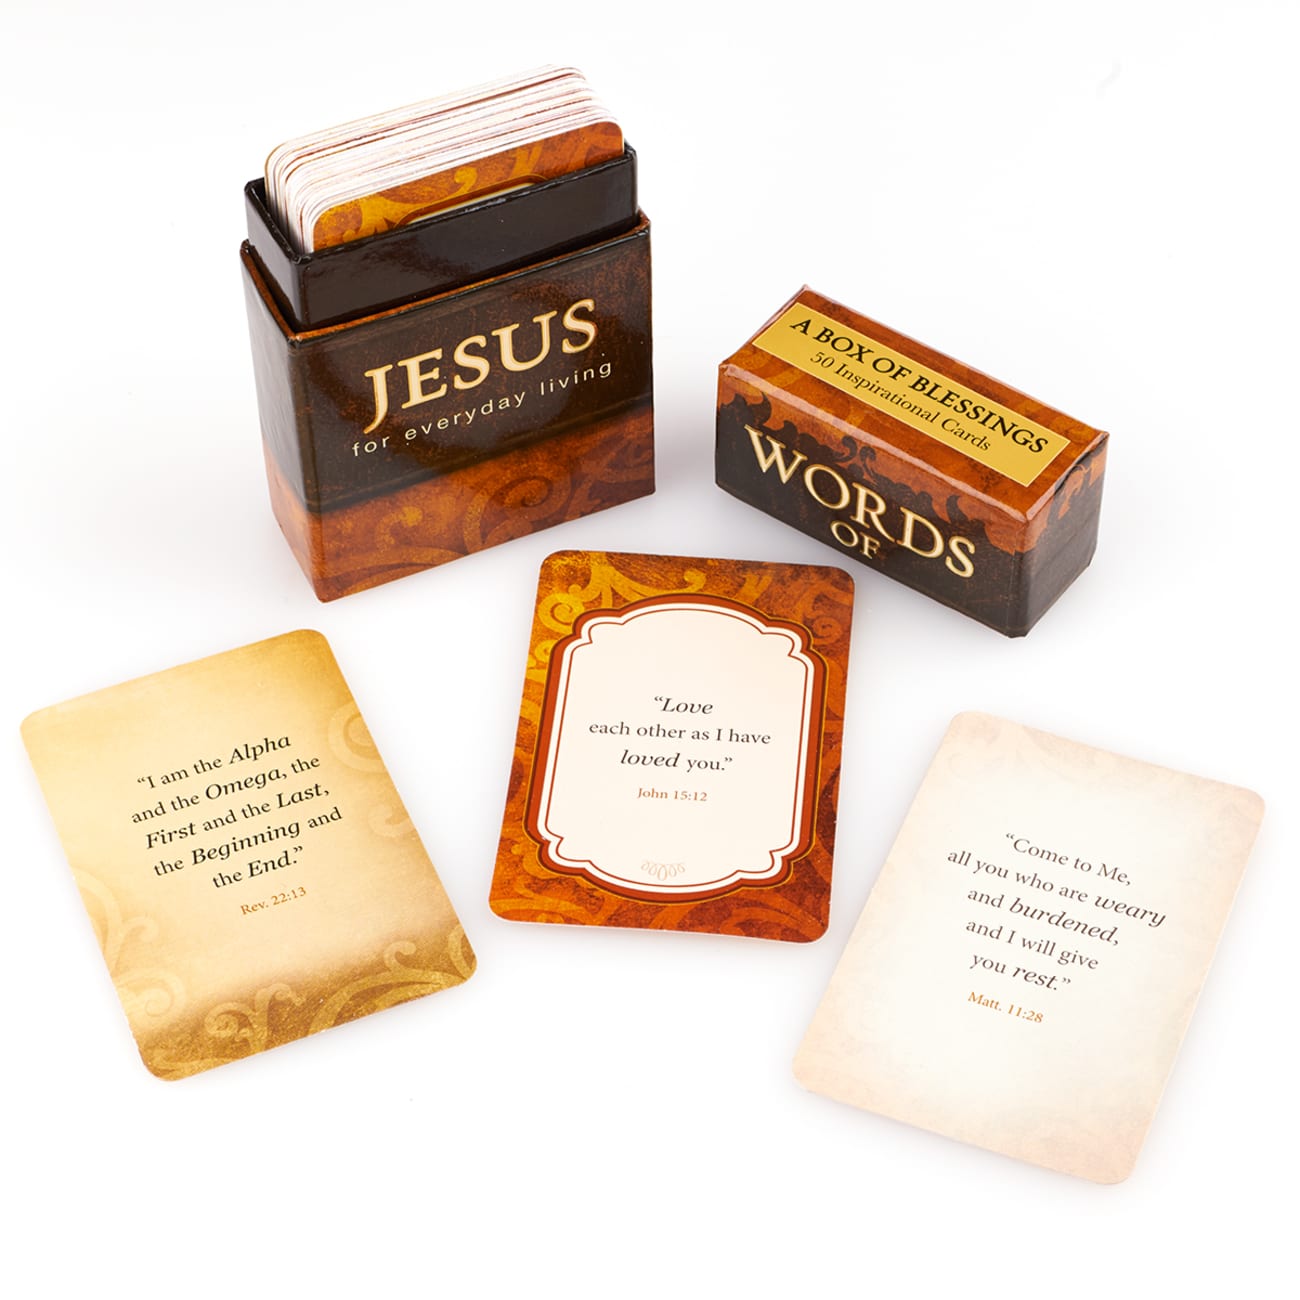 Box of Blessings: Words of Jesus For Everyday Living Stationery